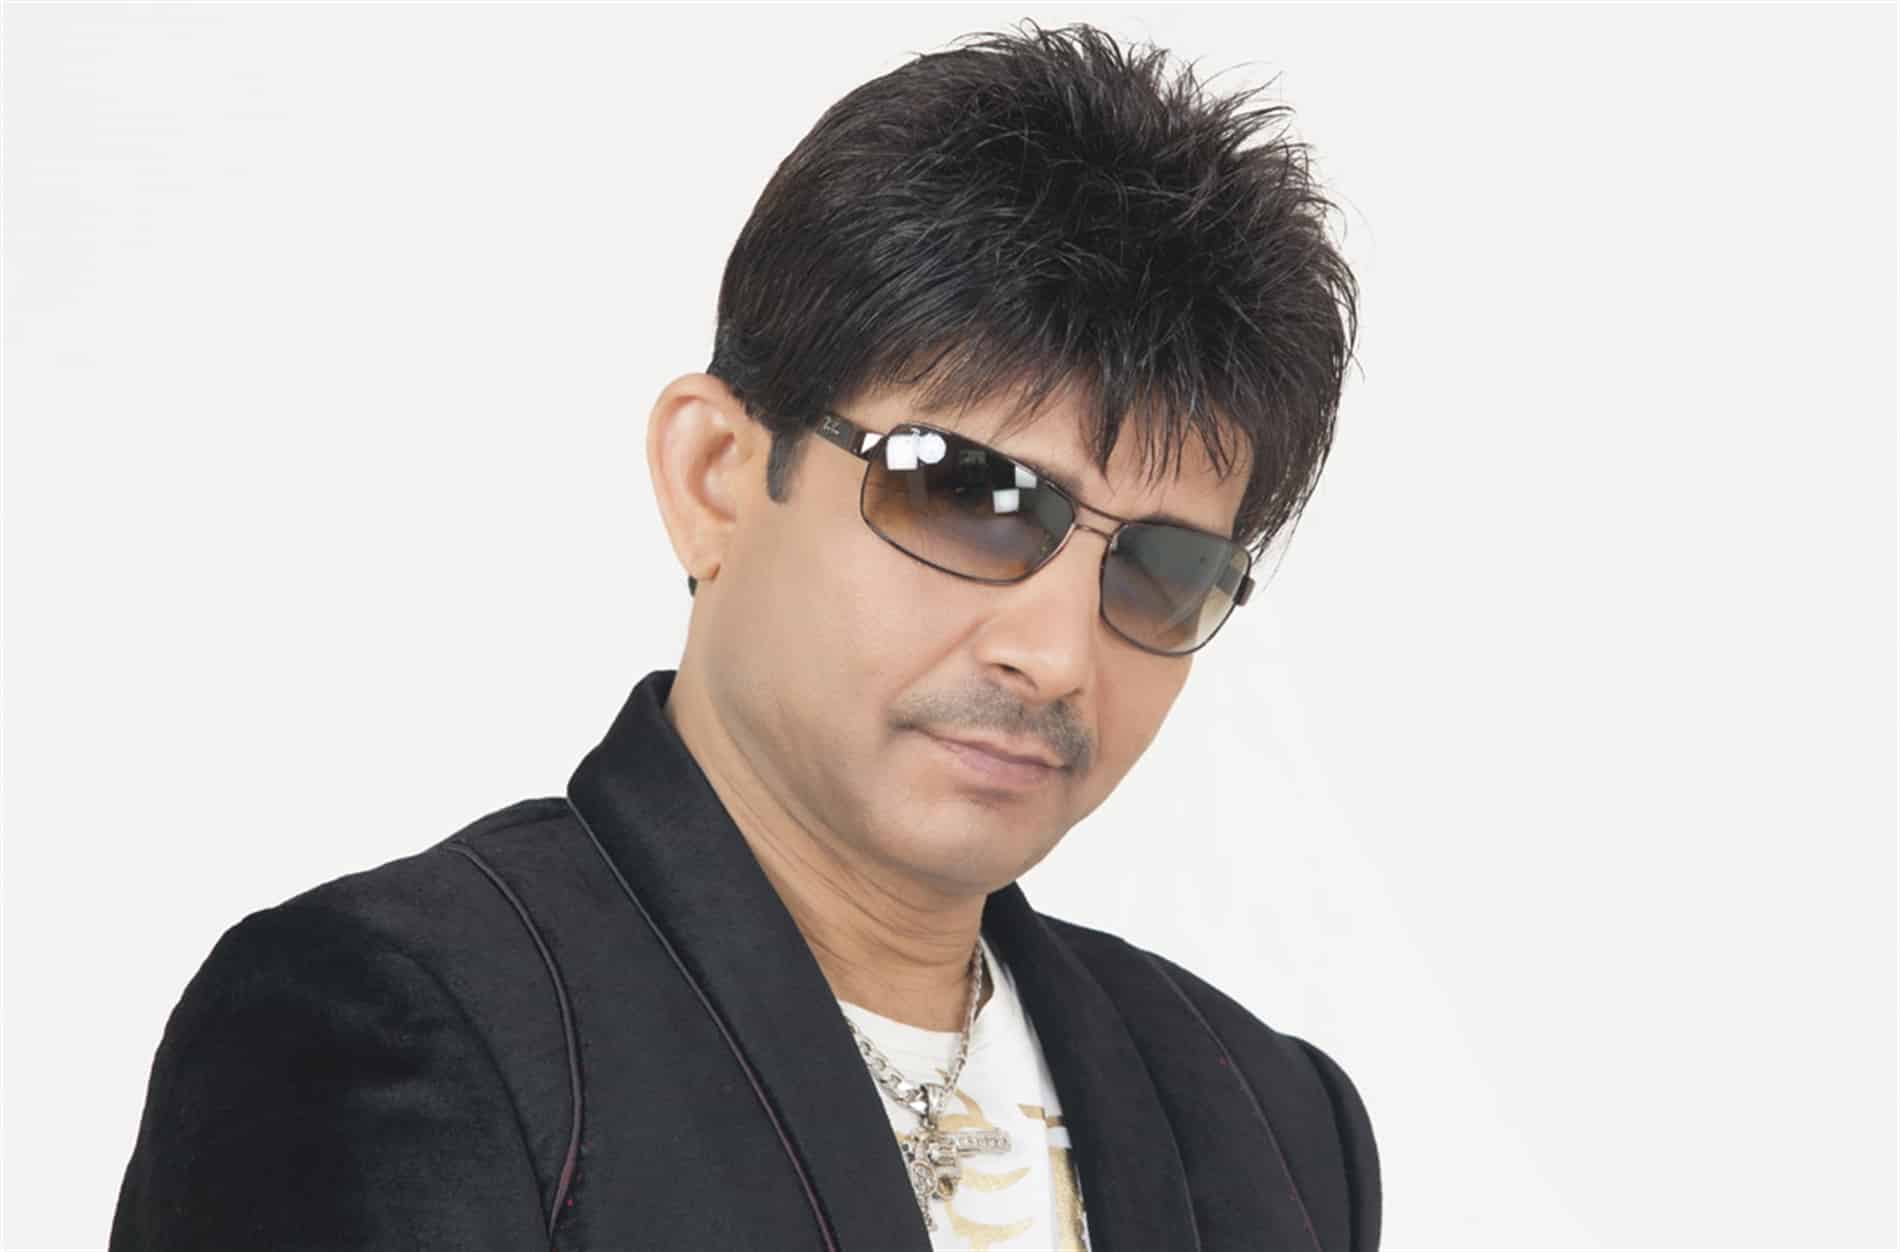 Kamaal R Khan’s eviction from the show